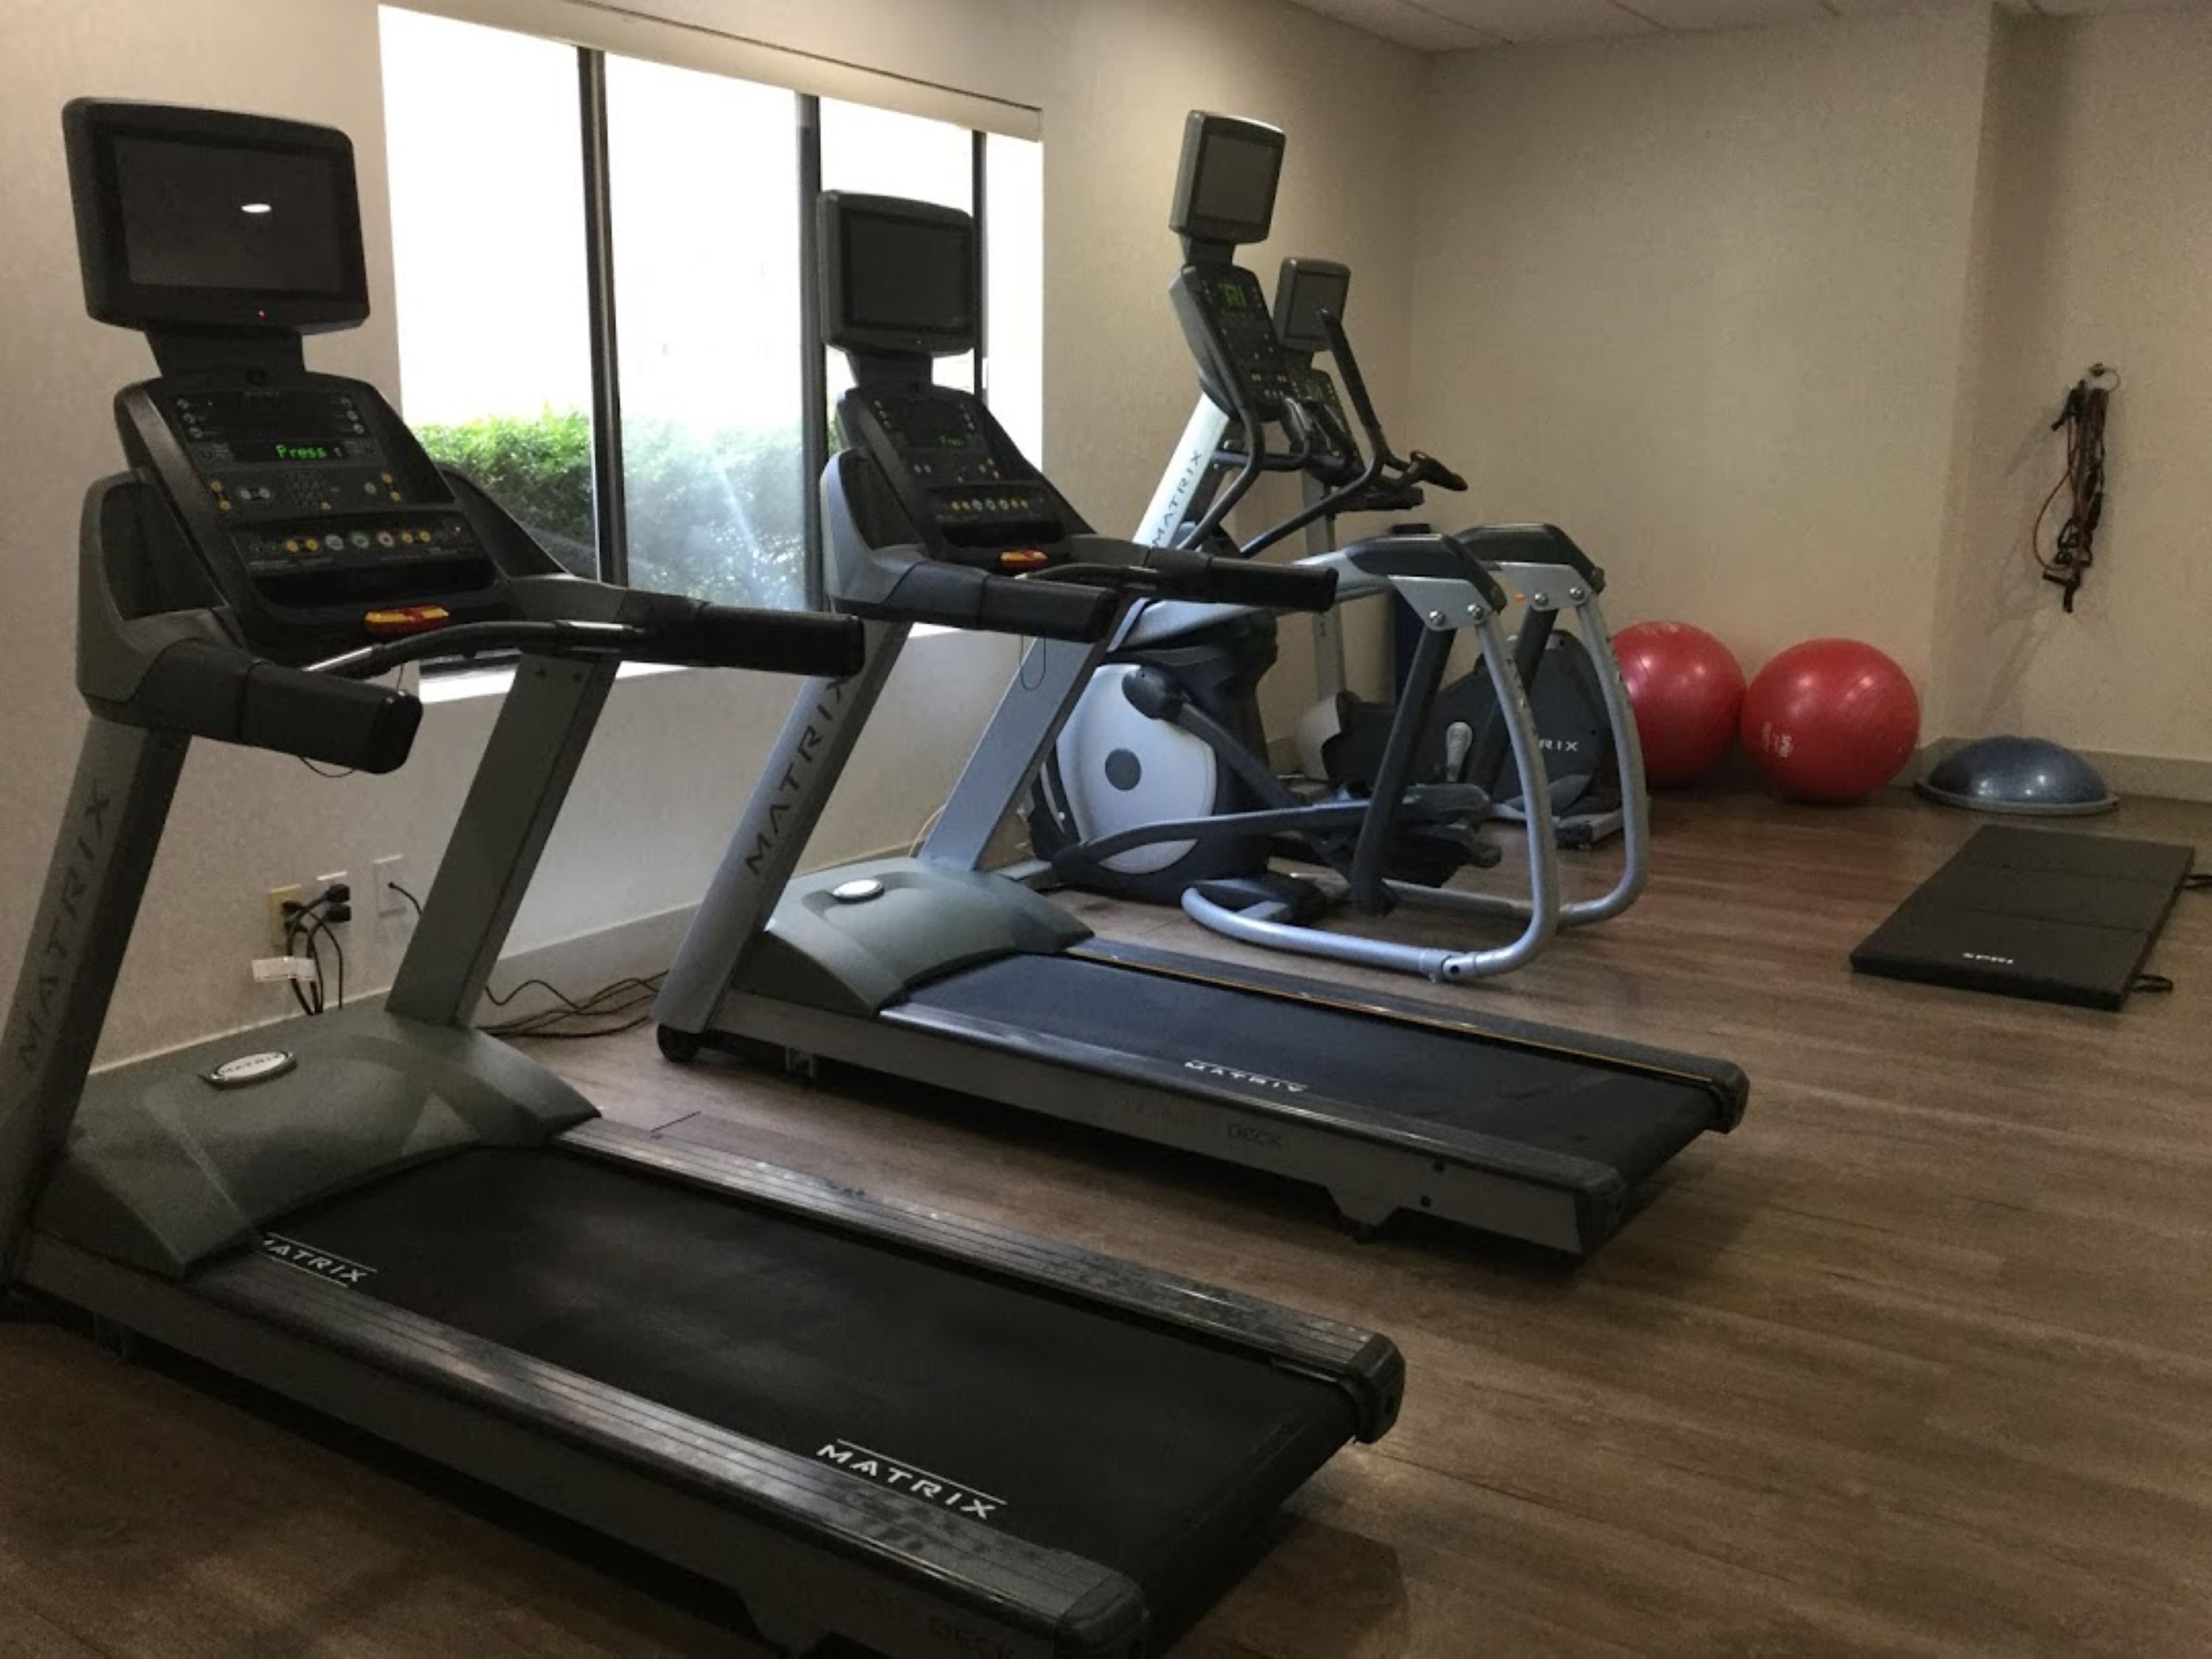 Our fitness center is open 24 hours on the main lobby